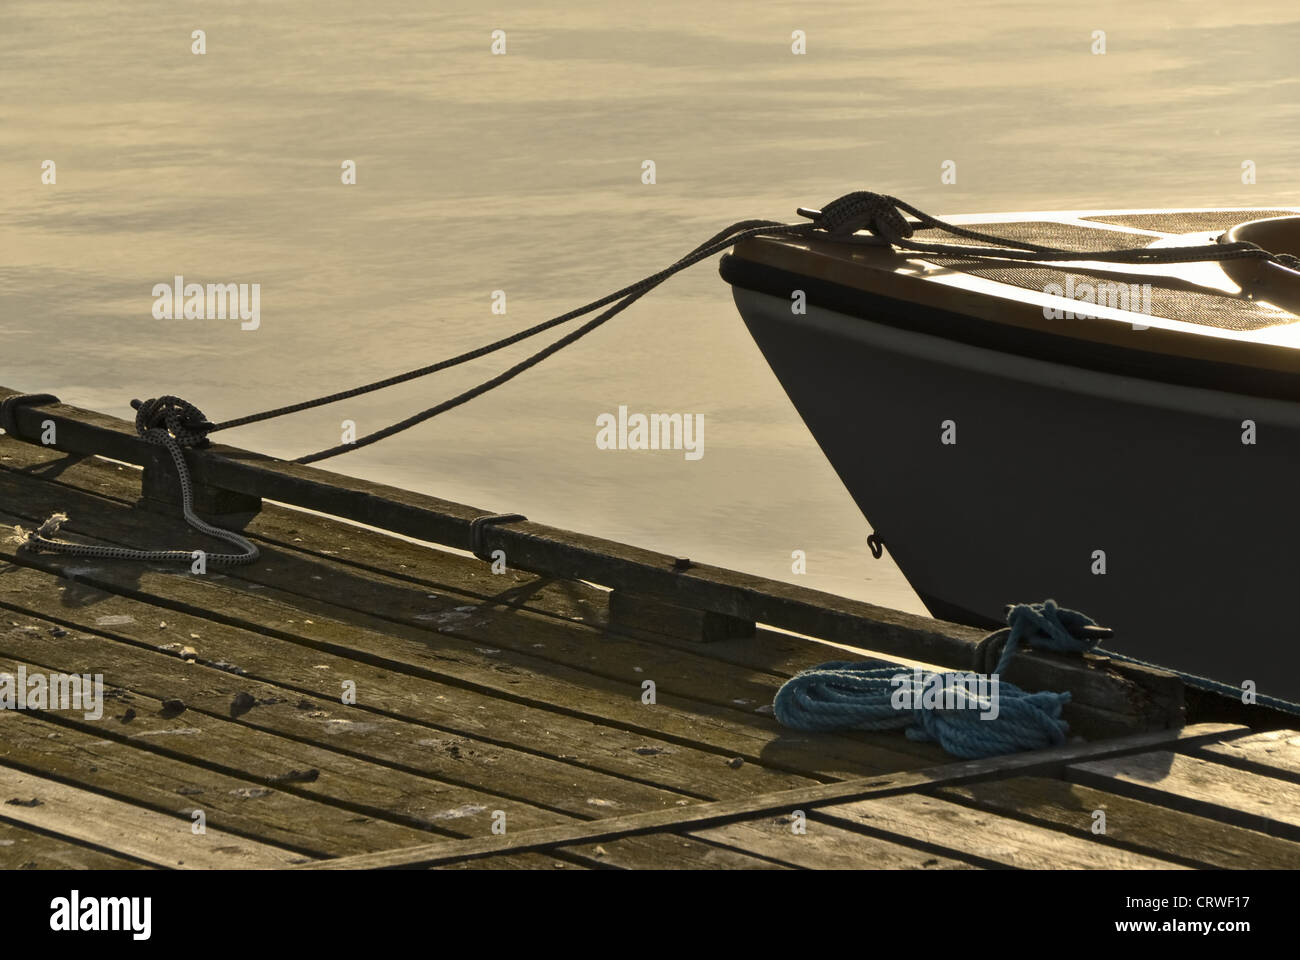 Boat on a mooring Stock Photo